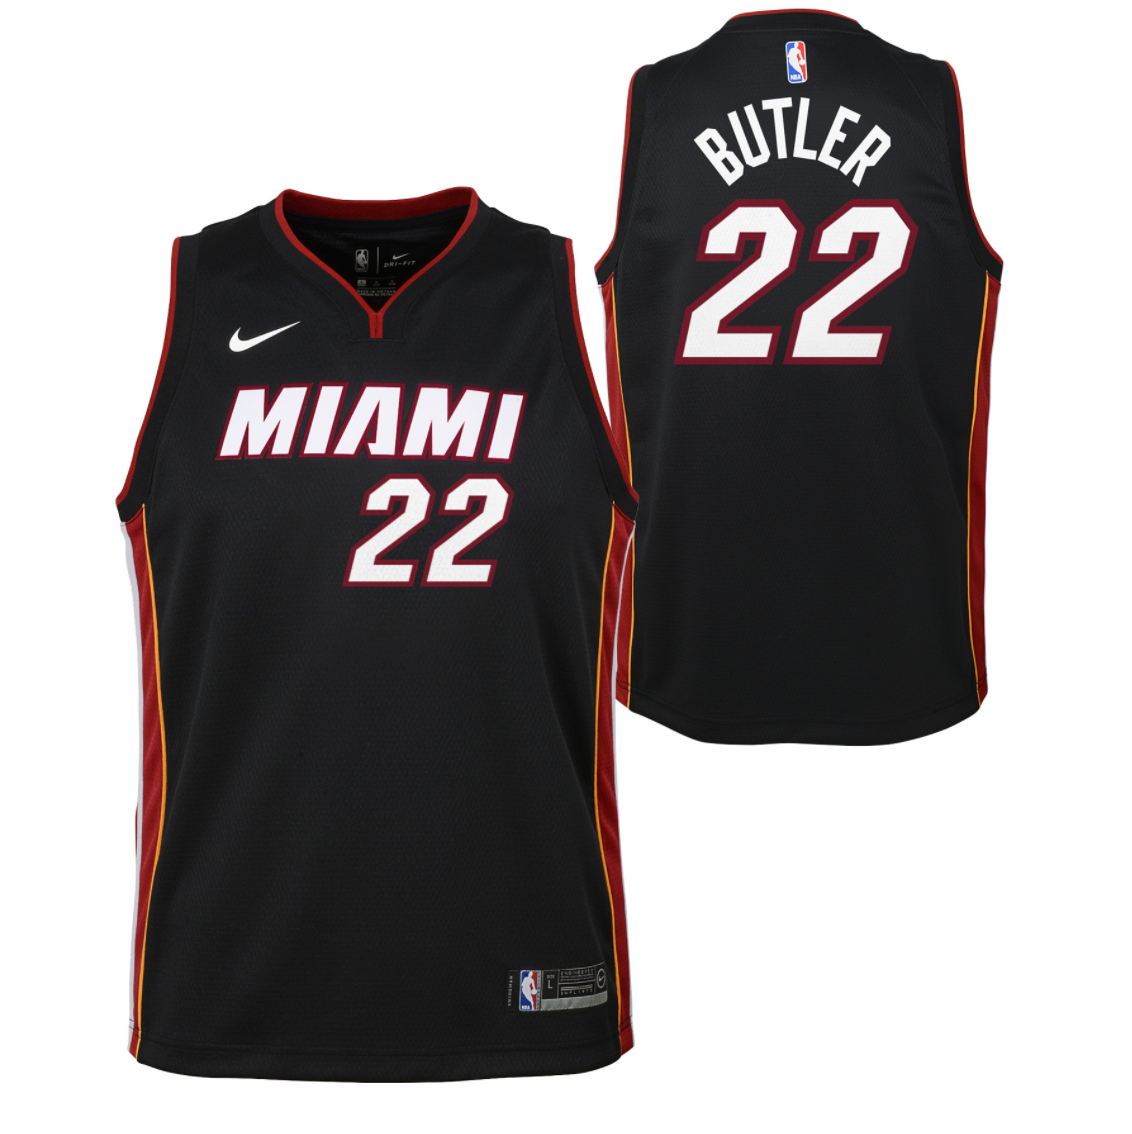 youth butler jersey